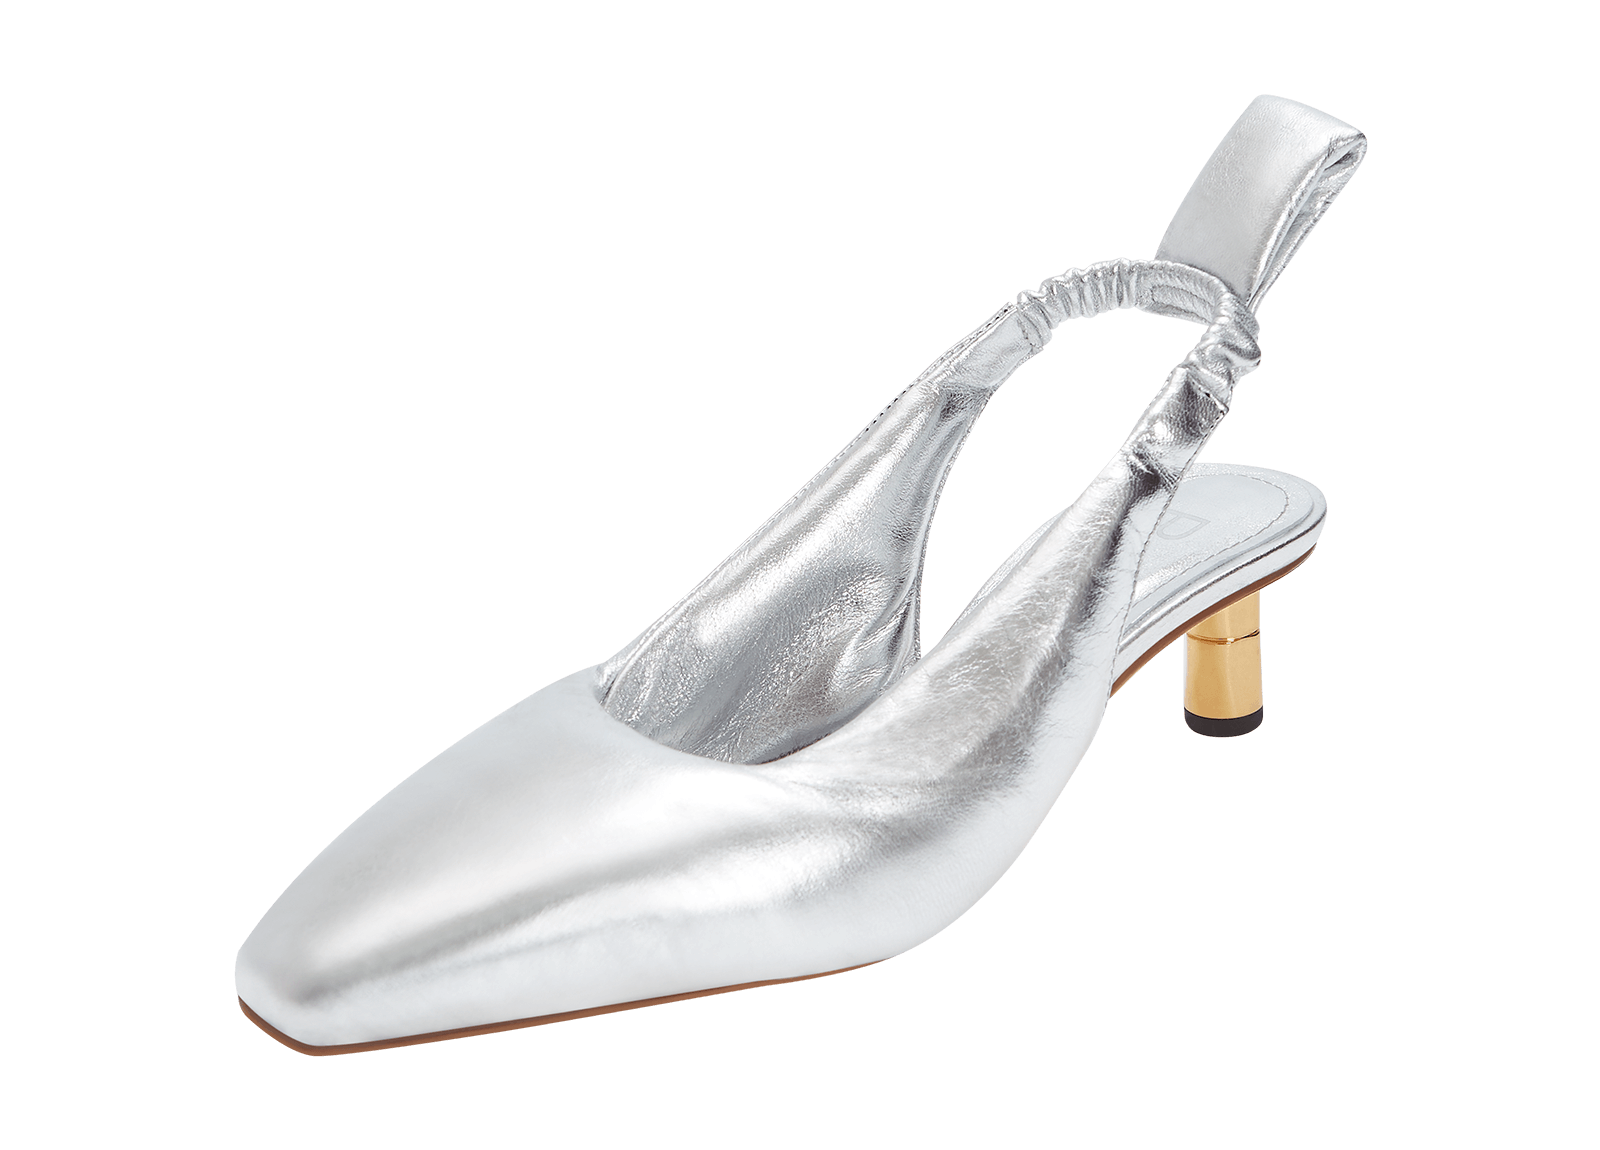 Metallic silver sandal with low heels. Oversized puffy slingback pump antique gold heel hardware. Lambskin upper and insole.